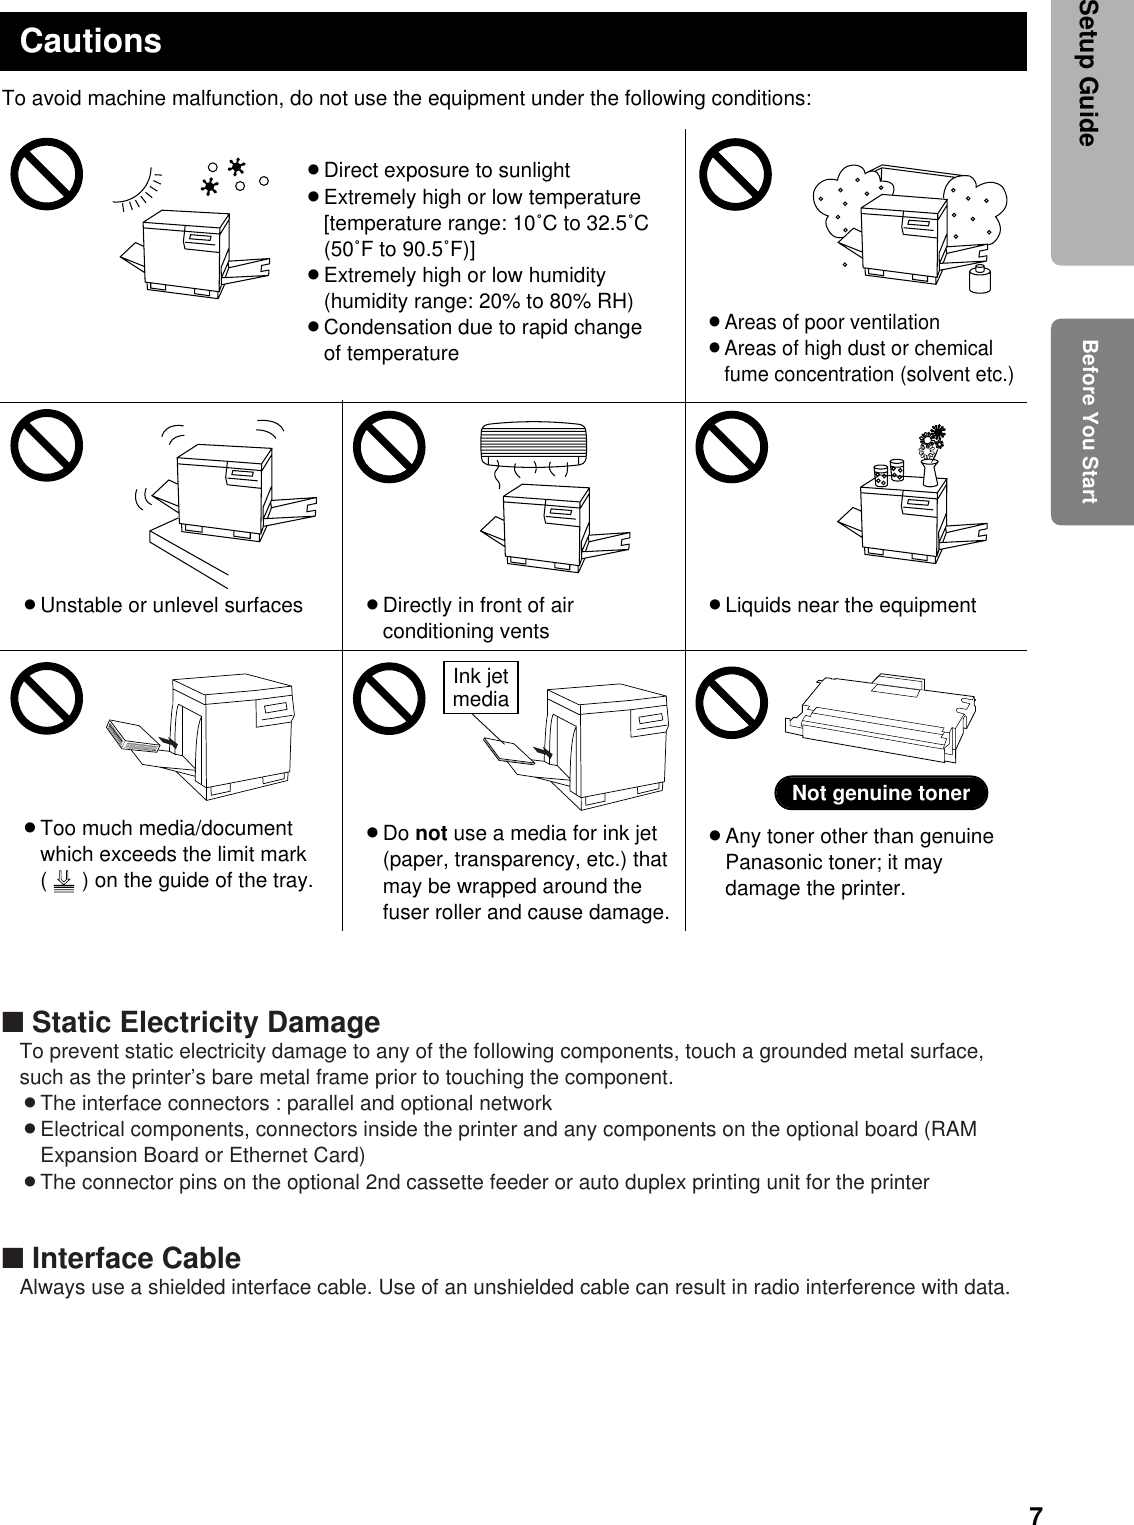 7To avoid machine malfunction, do not use the equipment under the following conditions:BLiquids near the equipmentBUnstable or unlevel surfaces BDirectly in front of airconditioning ventsCautionsBDirect exposure to sunlightBExtremely high or low temperature[temperature range: 10˚C to 32.5˚C(50˚F to 90.5˚F)]BExtremely high or low humidity(humidity range: 20% to 80% RH)BCondensation due to rapid changeof temperatureBAreas of poor ventilationBAreas of high dust or chemicalfume concentration (solvent etc.)BToo much media/documentwhich exceeds the limit mark(      ) on the guide of the tray.BAny toner other than genuinePanasonic toner; it maydamage the printer.Not genuine tonerBDo not use a media for ink jet(paper, transparency, etc.) thatmay be wrapped around thefuser roller and cause damage.Ink jetmedia■ Static Electricity DamageTo prevent static electricity damage to any of the following components, touch a grounded metal surface,such as the printer’s bare metal frame prior to touching the component.BThe interface connectors : parallel and optional networkBElectrical components, connectors inside the printer and any components on the optional board (RAMExpansion Board or Ethernet Card)BThe connector pins on the optional 2nd cassette feeder or auto duplex printing unit for the printer■ Interface CableAlways use a shielded interface cable. Use of an unshielded cable can result in radio interference with data.Before You StartSetup Guide